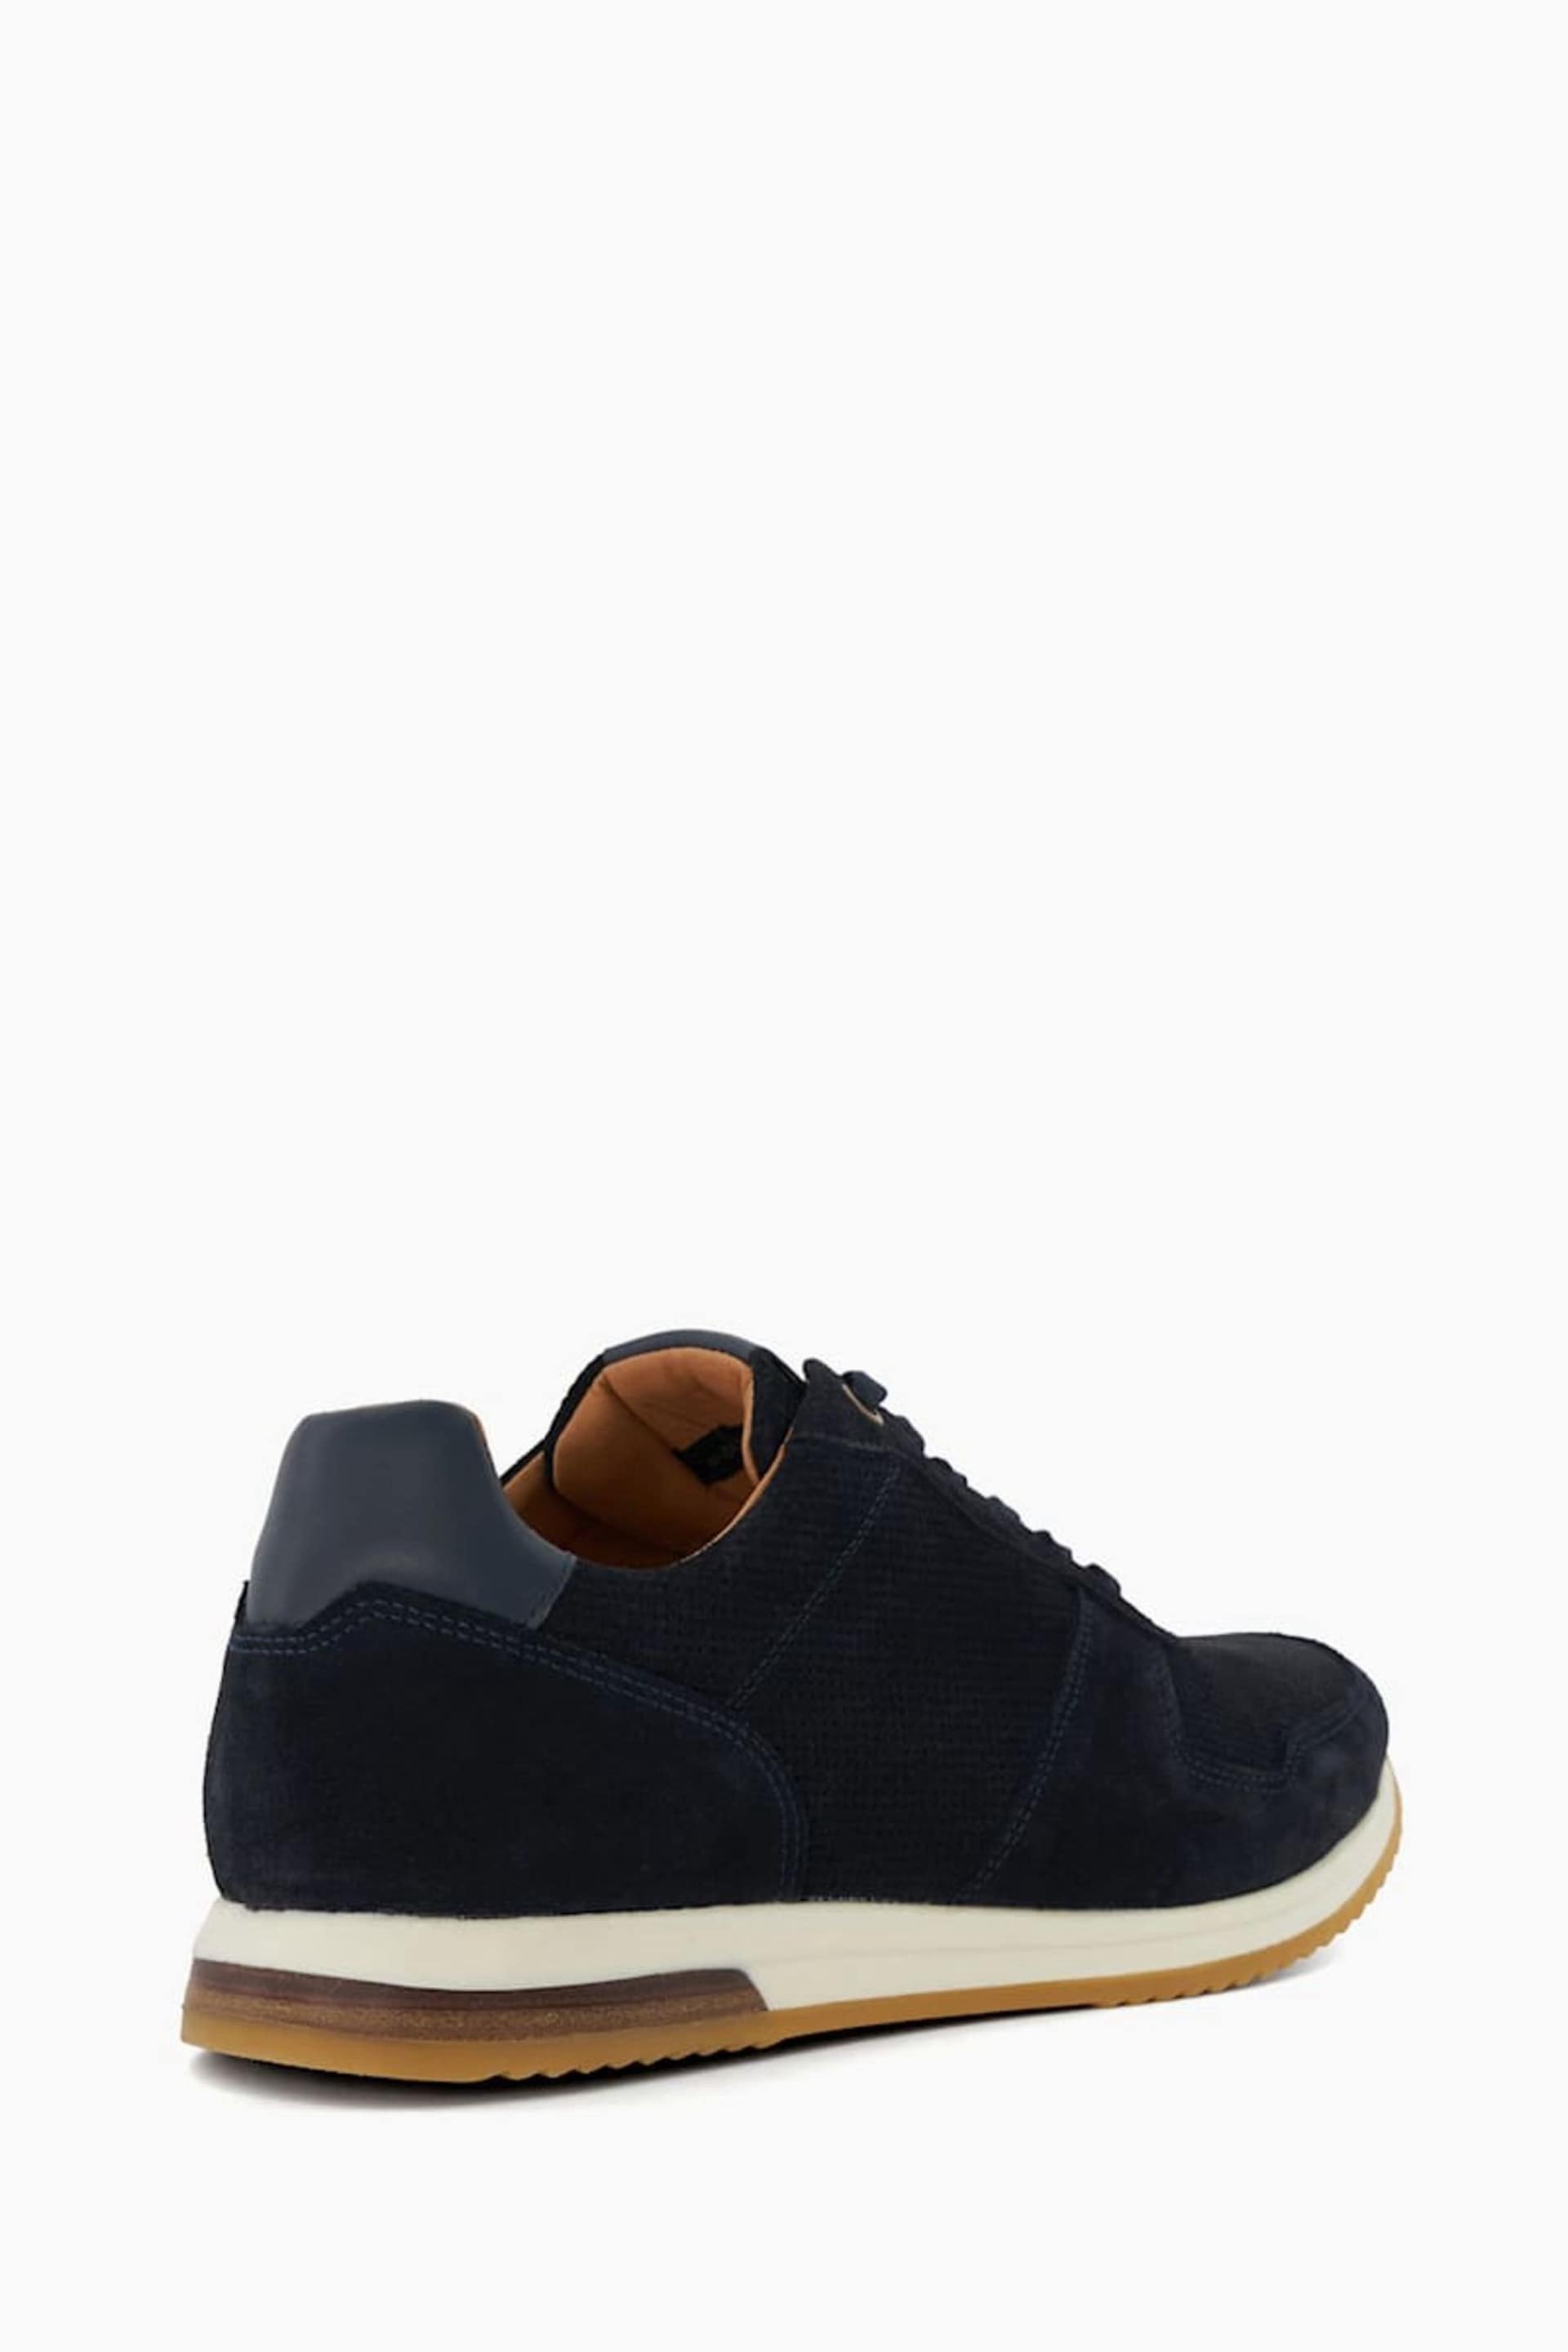 Dune London Blue Trilogy Perforated Runner Trainers - Image 4 of 6